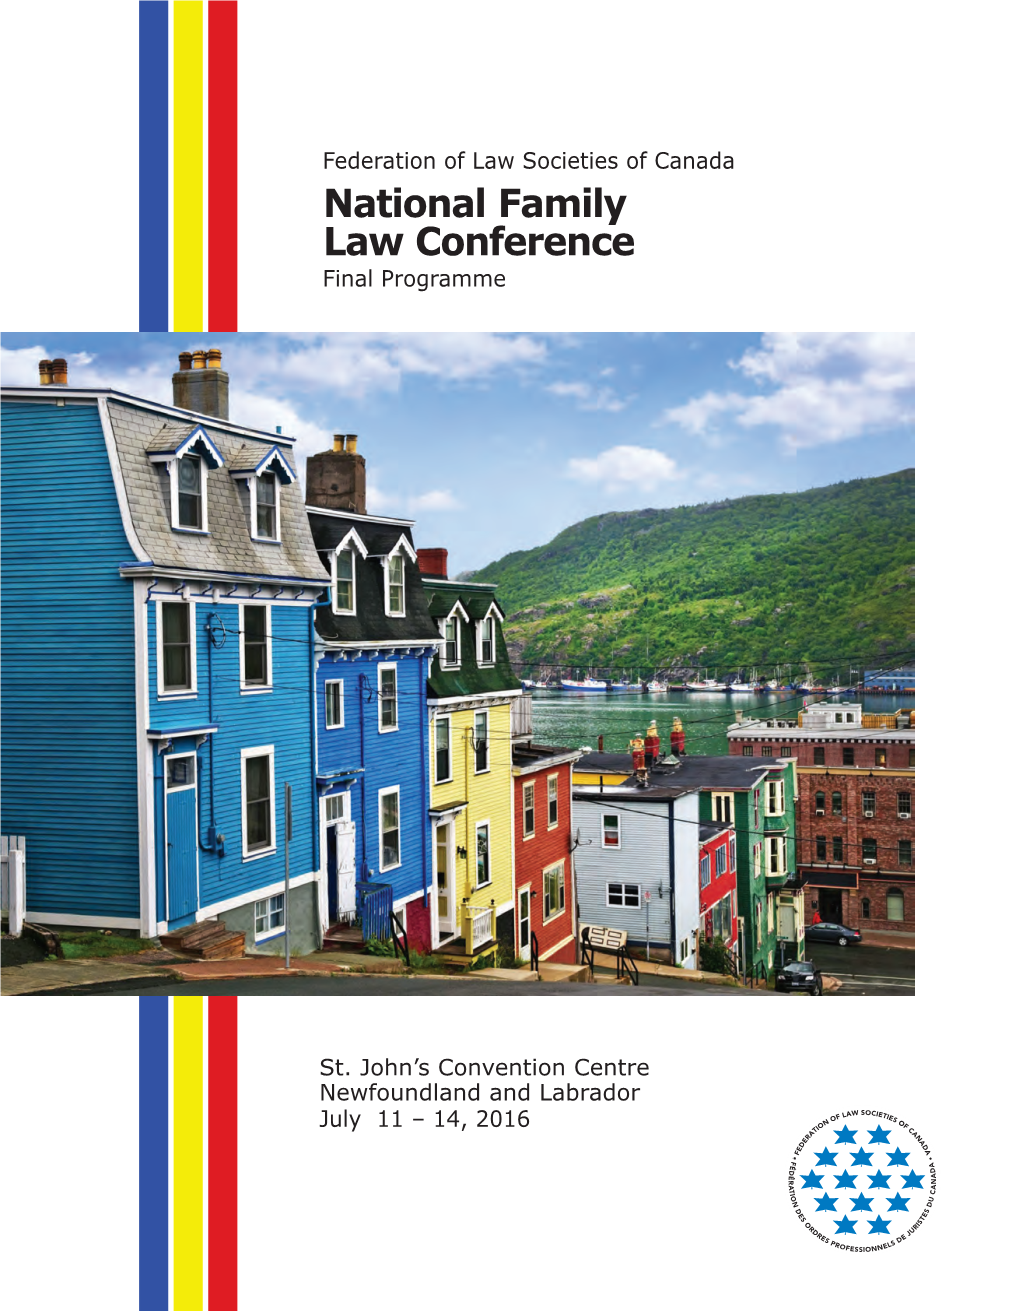 National Family Law Conference Final Programme